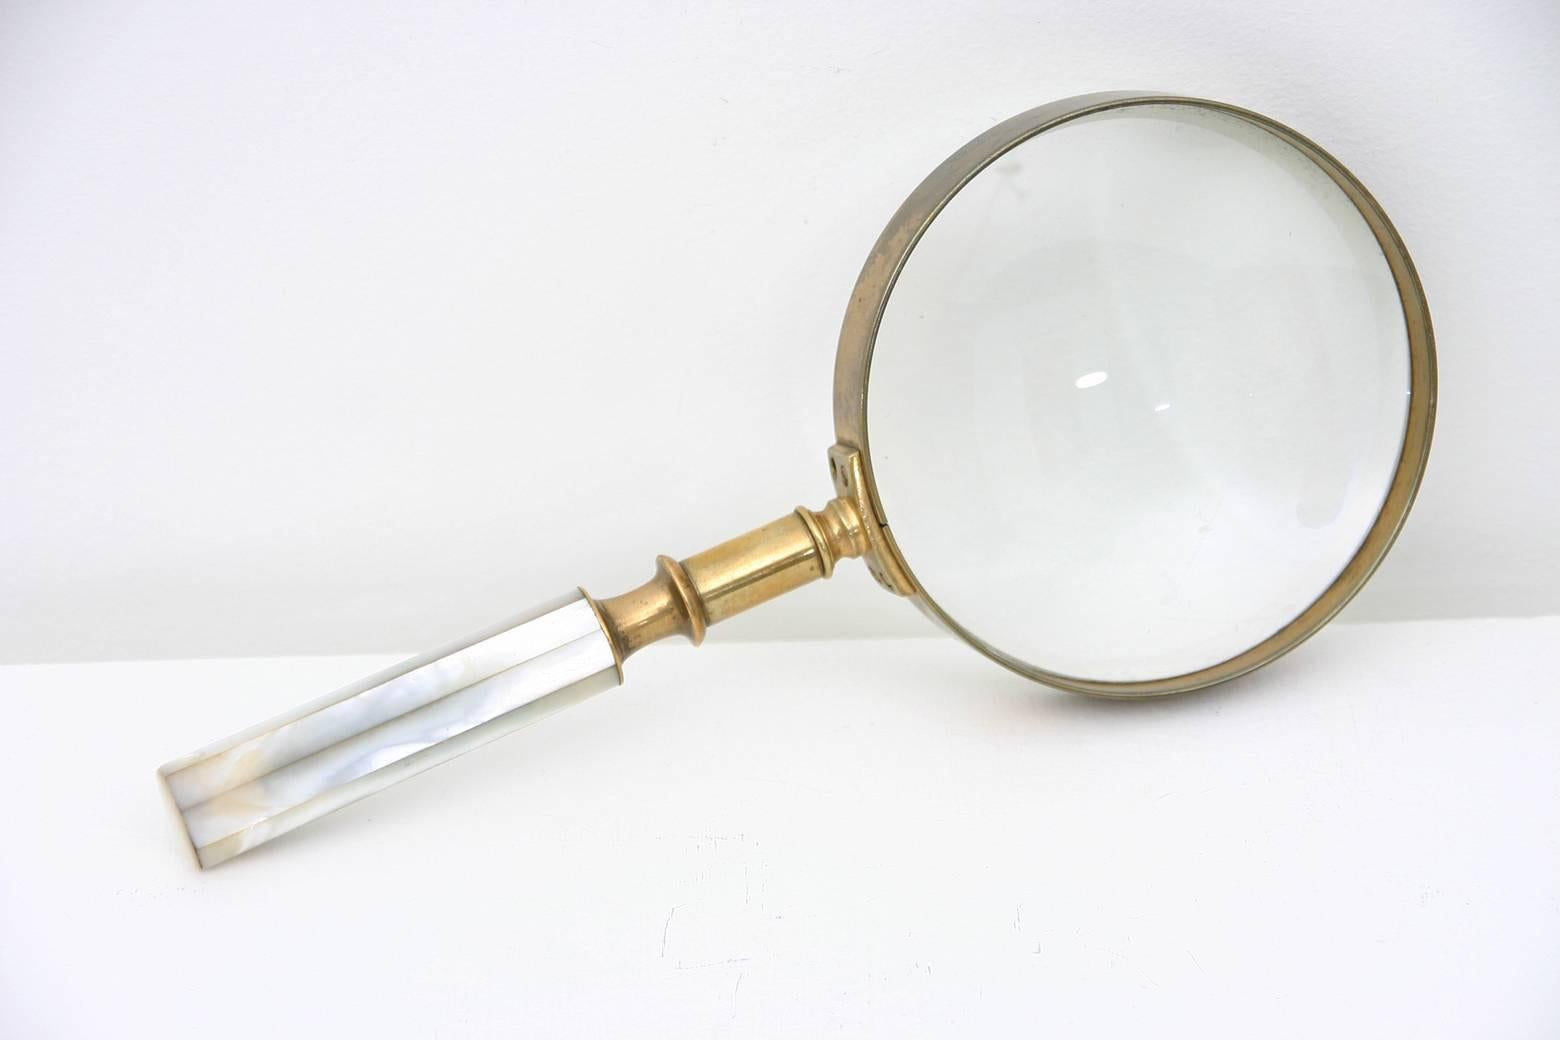 A 19th century mother-of-pearl and brass magnifying glass with original case.